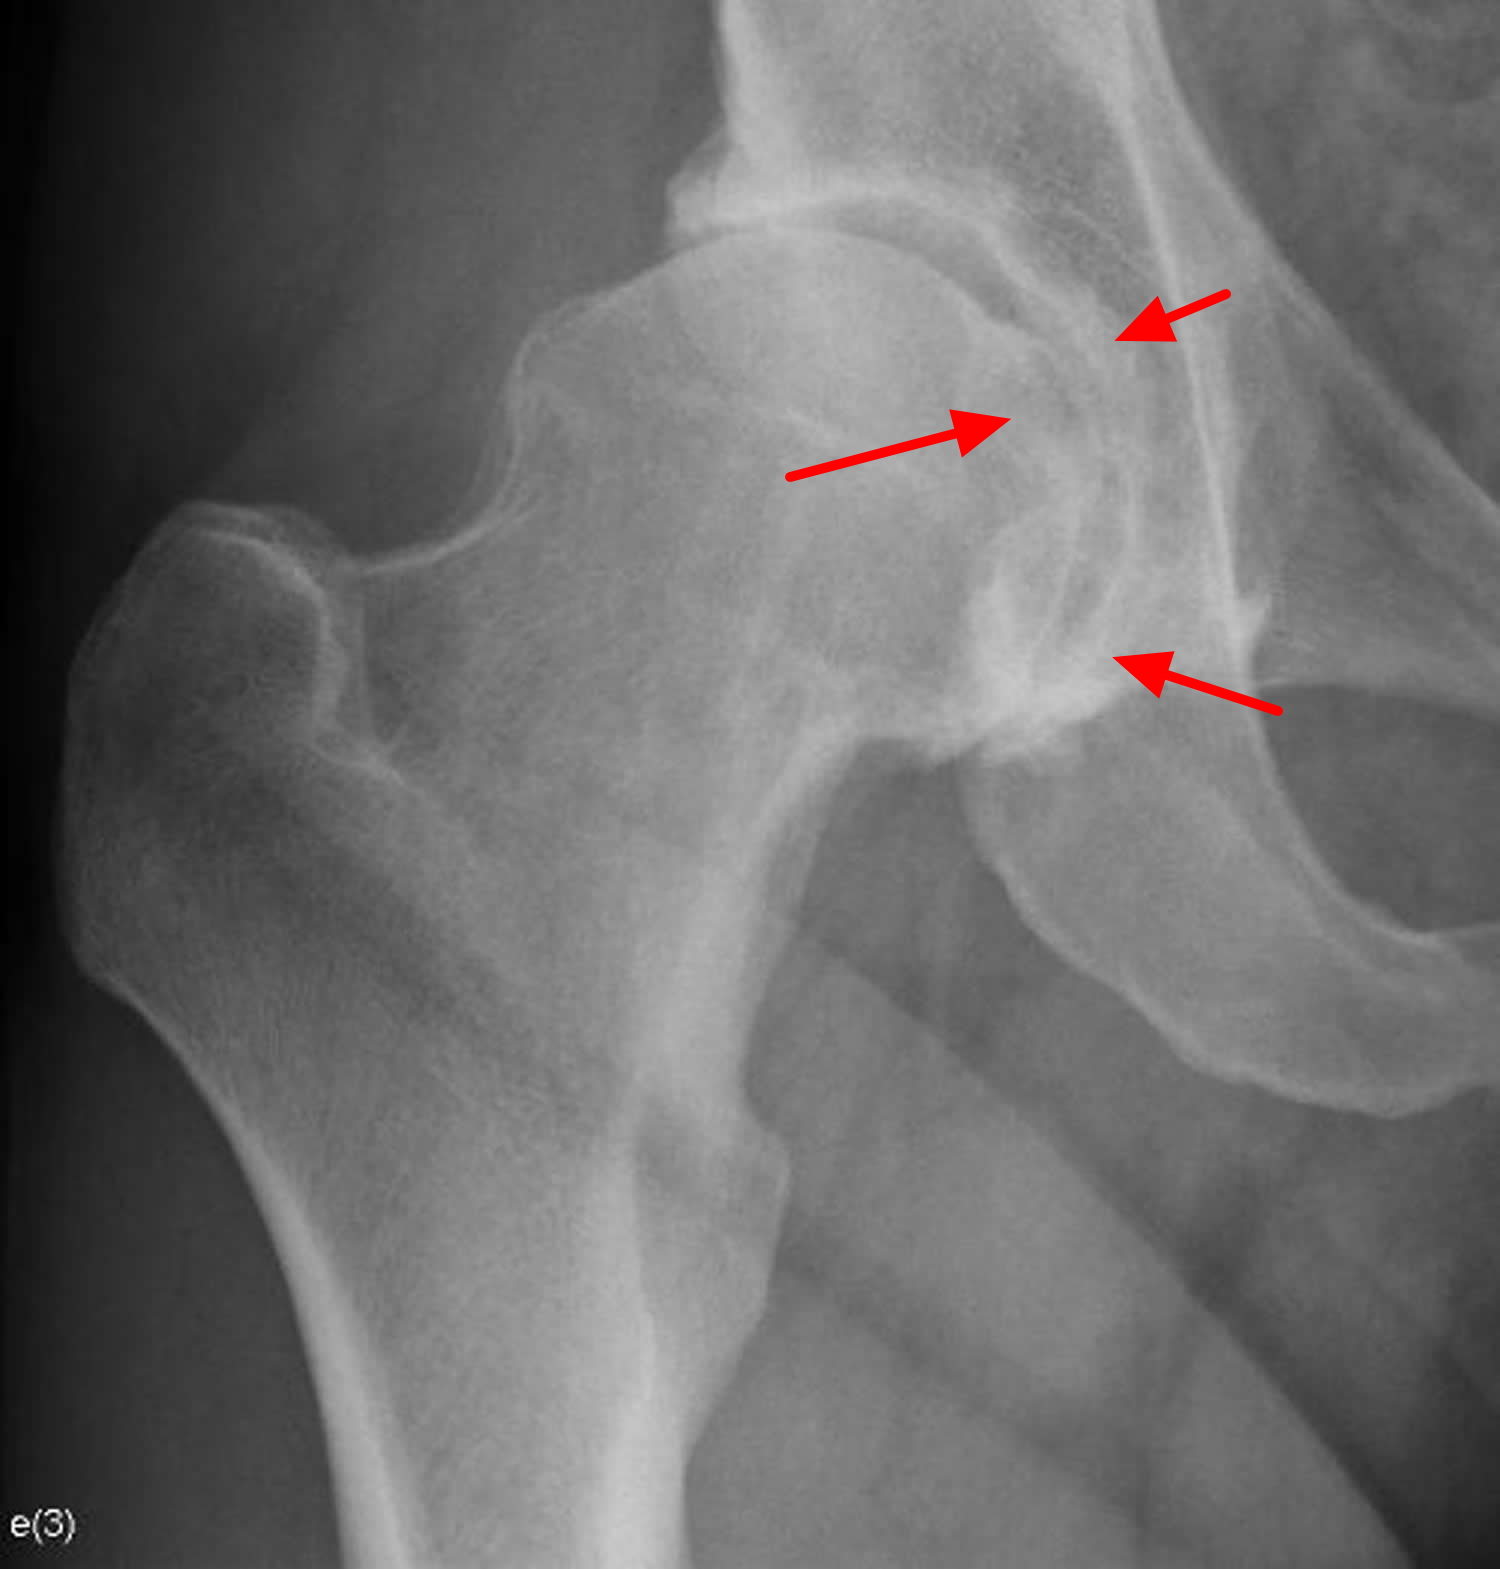 normal hip xray compared to oa